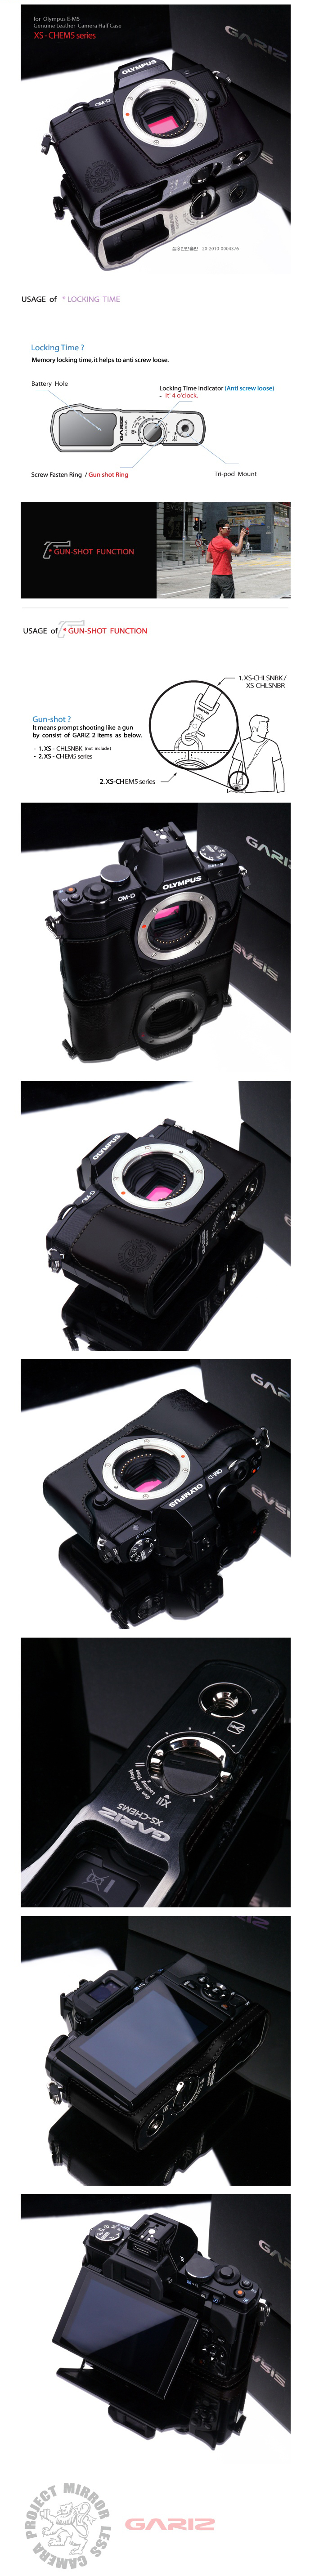 Gariz Leather Half Case Body for the Micro Four Thirds Compact System Camera Olympus OMD EM5 grip alternative catalogue